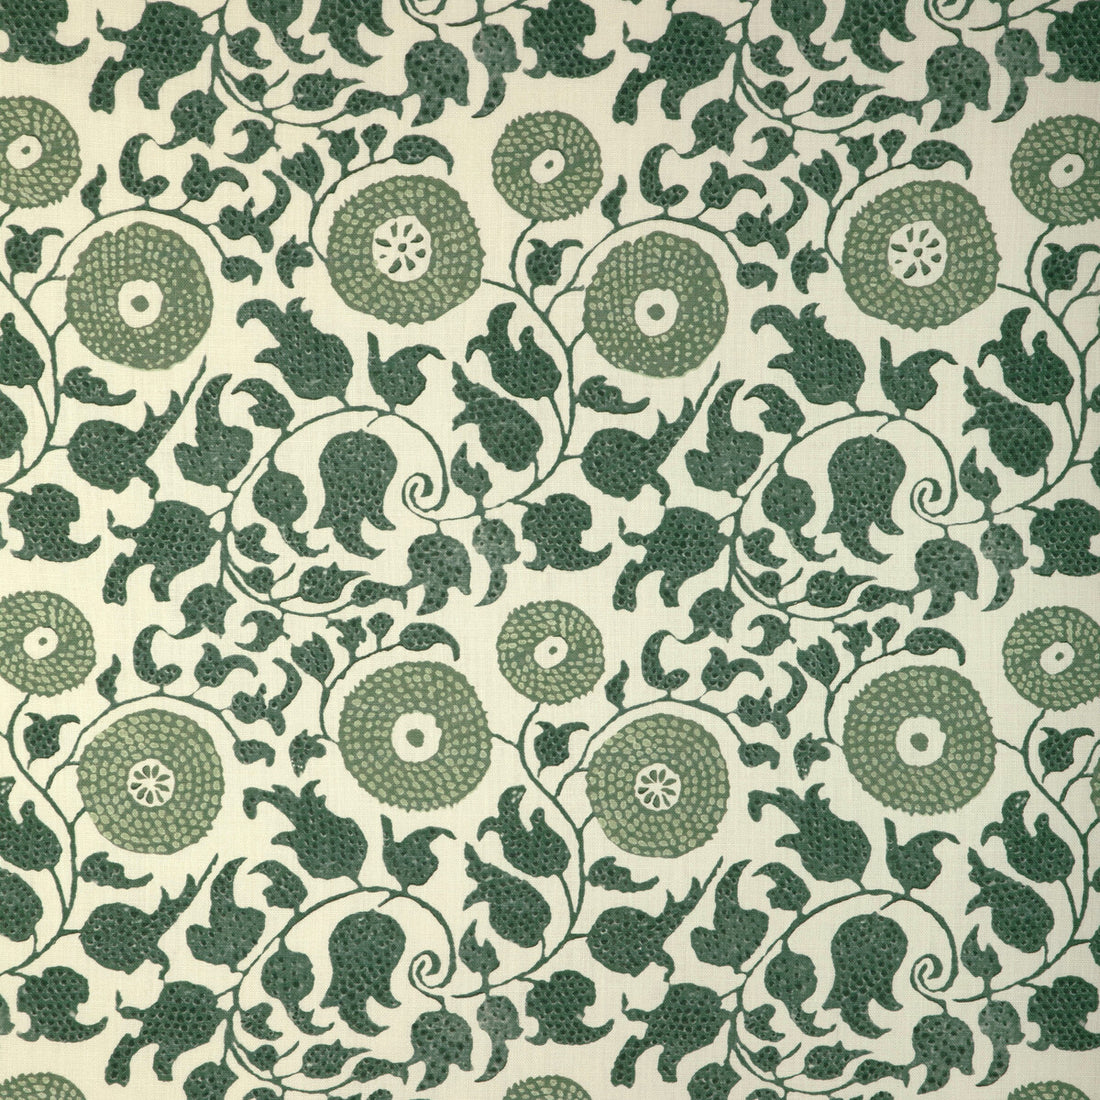 Eldora Print fabric in juniper/leaf color - pattern 2020204.33.0 - by Lee Jofa in the Clare Prints collection